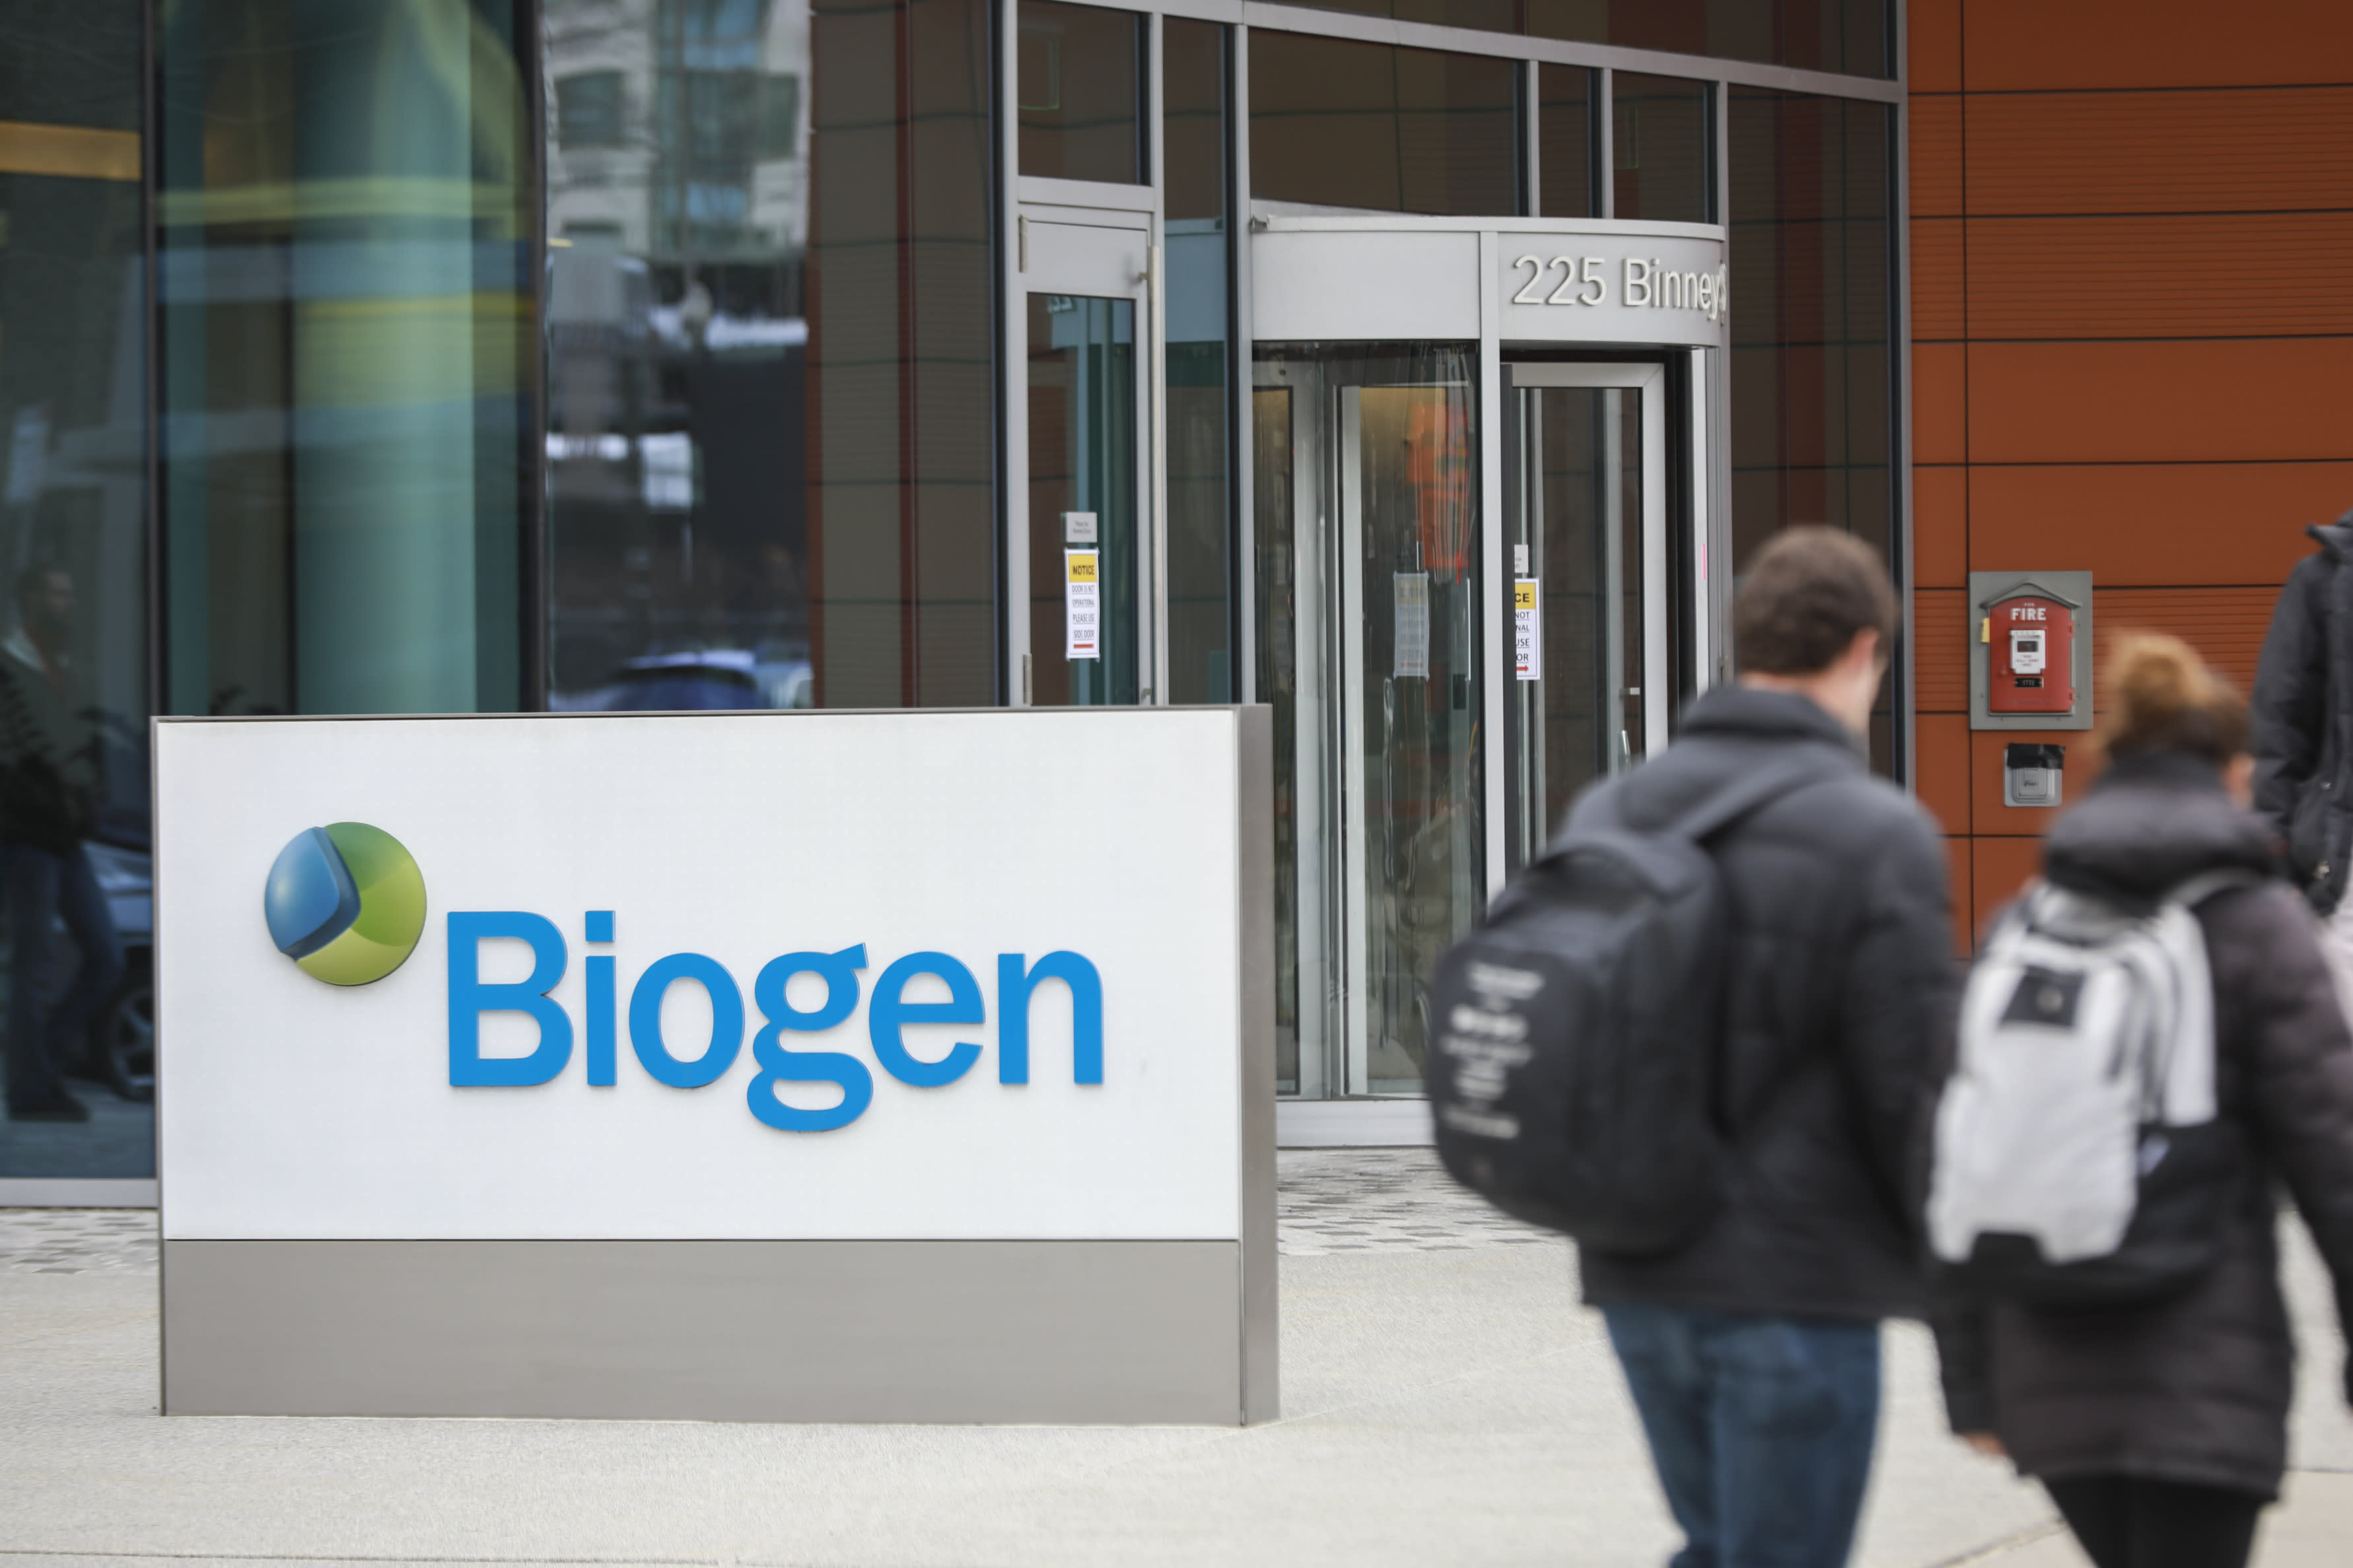 The Food and Drug Administration on Monday approved Biogen's Alzheimer's drug aducanumab, making it the first drug cleared by U.S. regulator